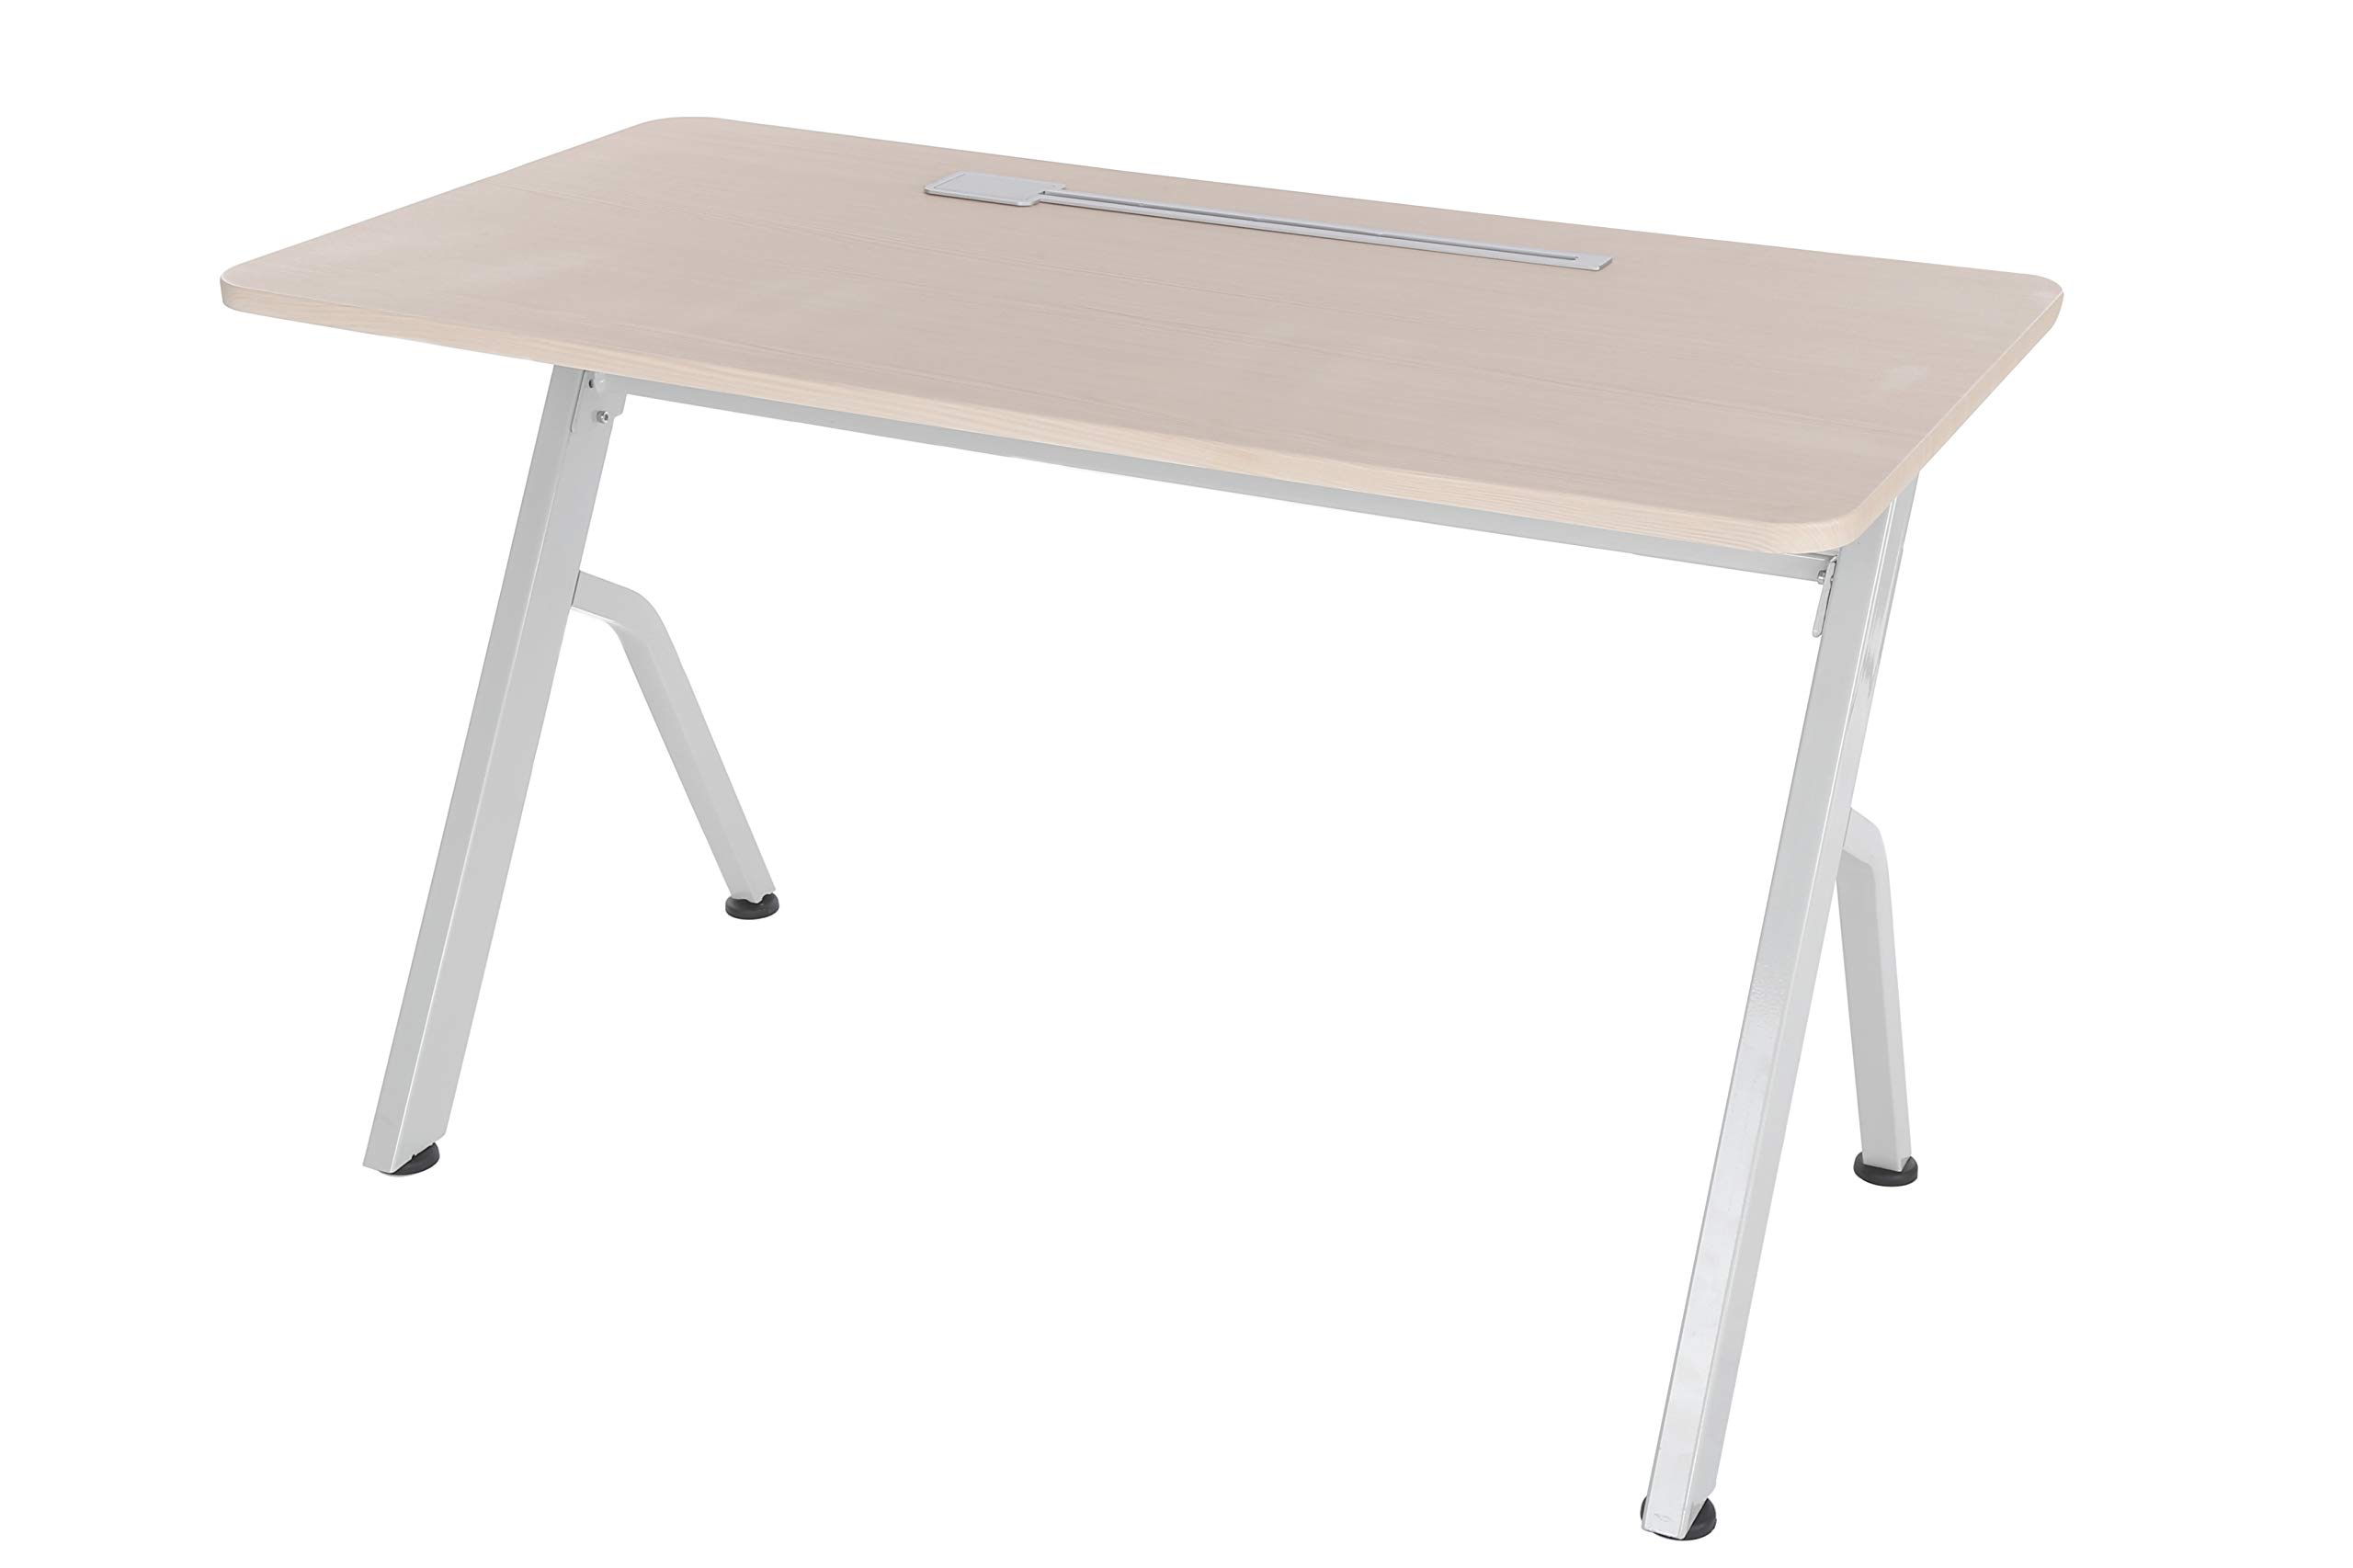 ApexDesk SSD-4723-OAK 47” Compact Home and Office, Modern and Simple Design, Same Color as Larger Standing Desk in Elite Series, Sturdy Steel Frame...